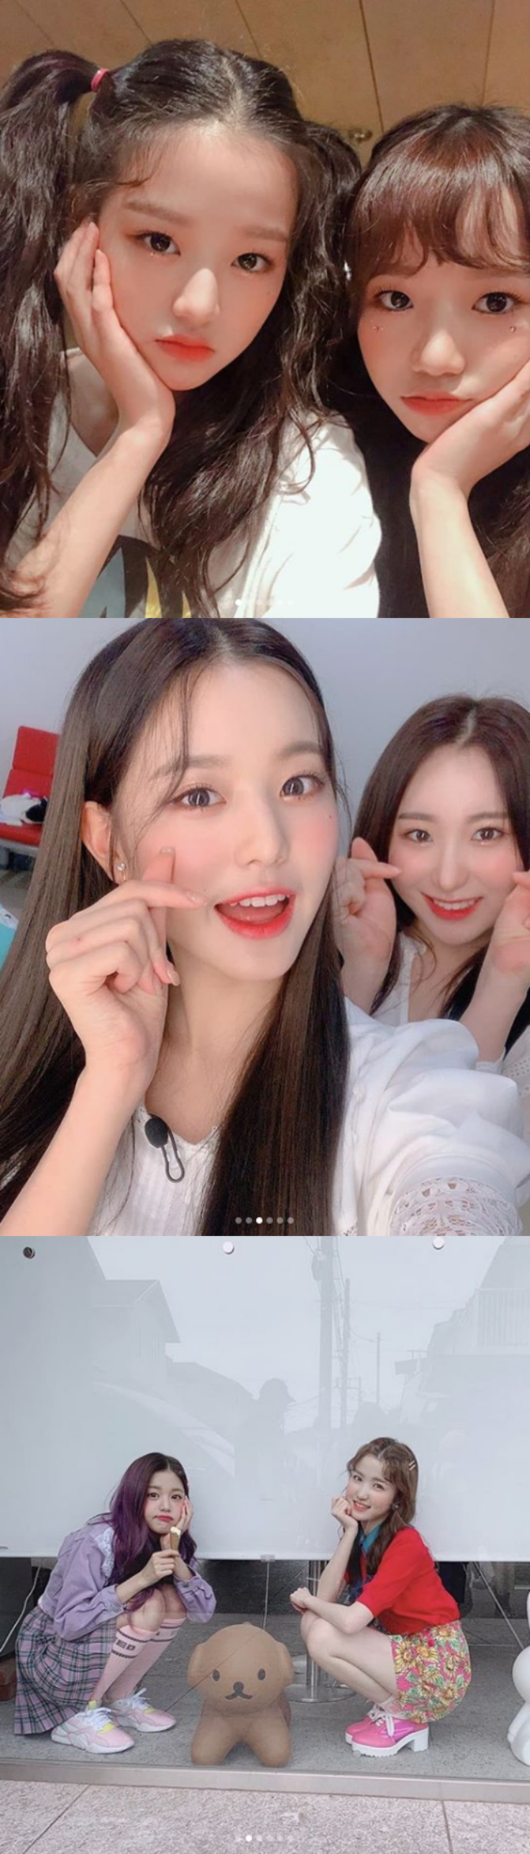 Girl group IZ*ONE member Jang Won-young released Selfie for birthday.On the afternoon of the 31st, IZ*ONEs official SNS said, Won Young will be proud of his birthday. The hot Summer also announced that he could not grow up in front of Wool Won Young.But even after Summer, I can not take off my sunglasses. I can not see my eyes when I see Won Young. The photo showed the daily life of Jang Won-young and IZ*ONE members.IZ*ONE members affectionate moments, such as before and after the stage, were captured and attracted attention.In particular, Jang Won-young boasts a lovely charm with beautiful looks like dolls.Jang Won-young is in the top spot in the cable channel Mnet survival program Produce 48 and debuted as an IZ*ONE member.IZ*ONE Official SNS